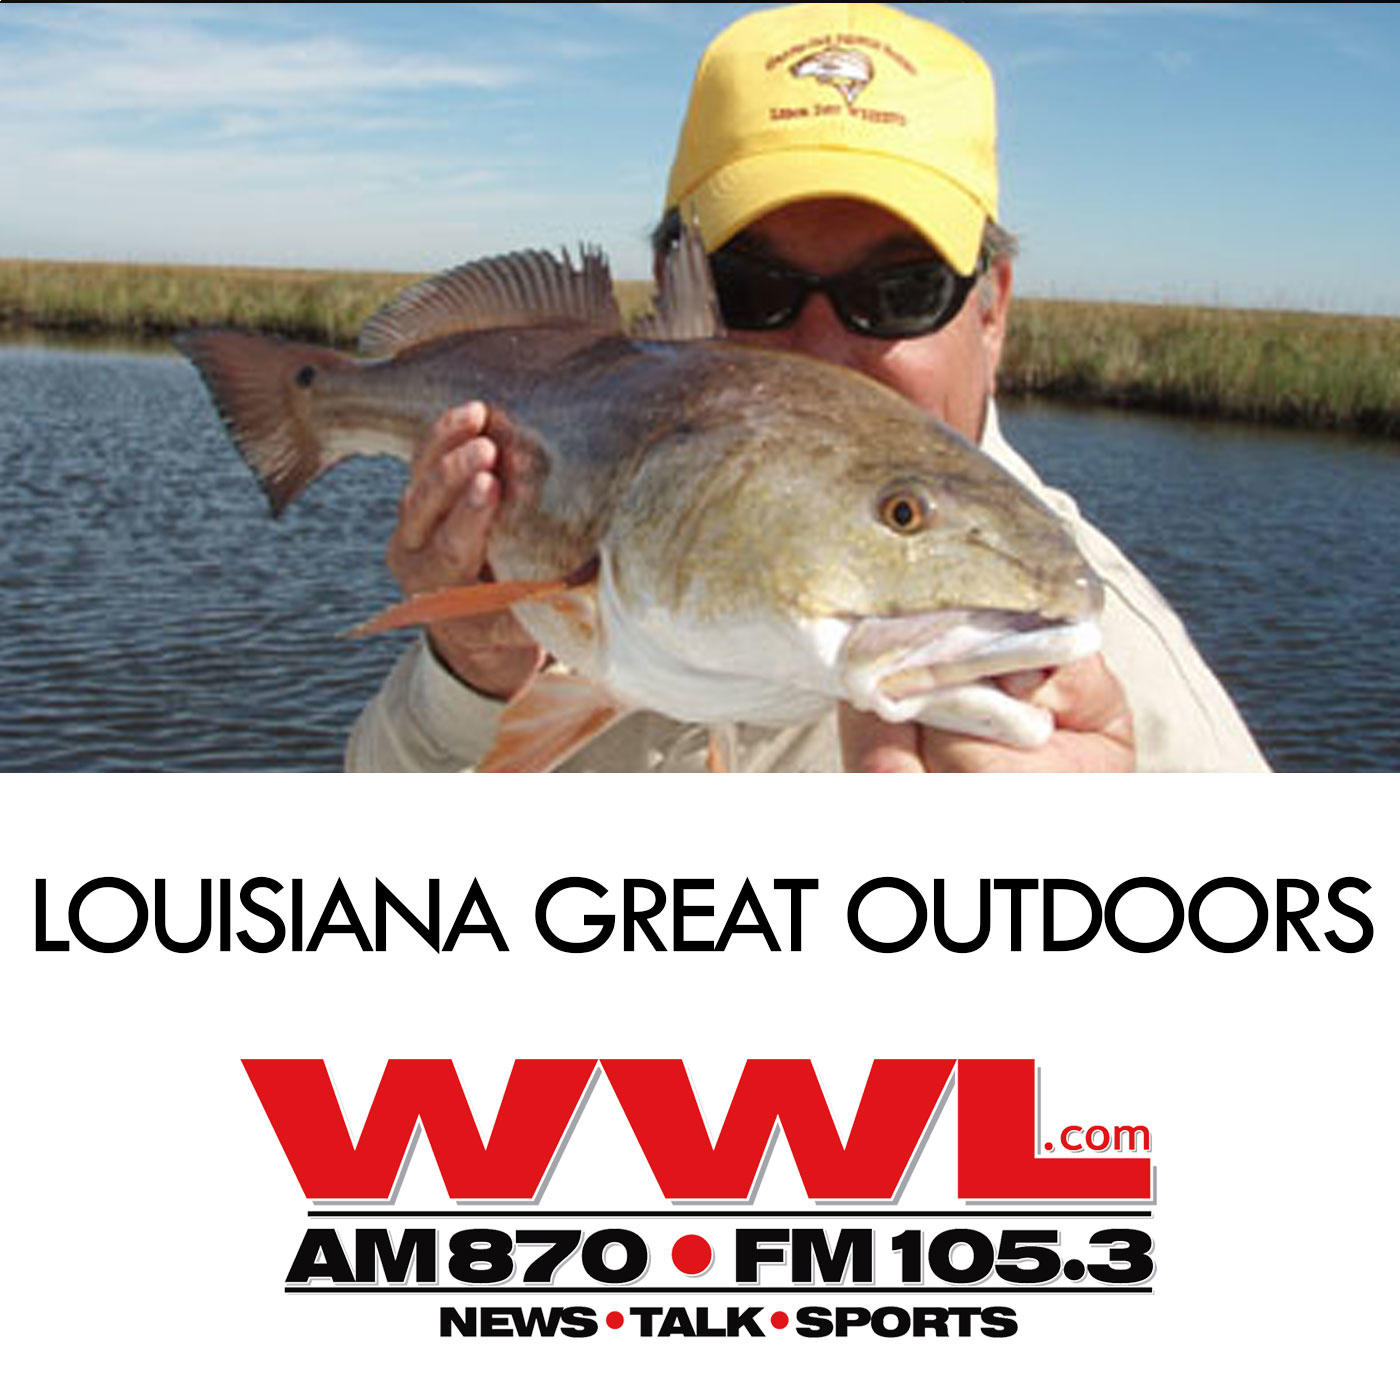 How could the wind change affect your fishing this weekend?